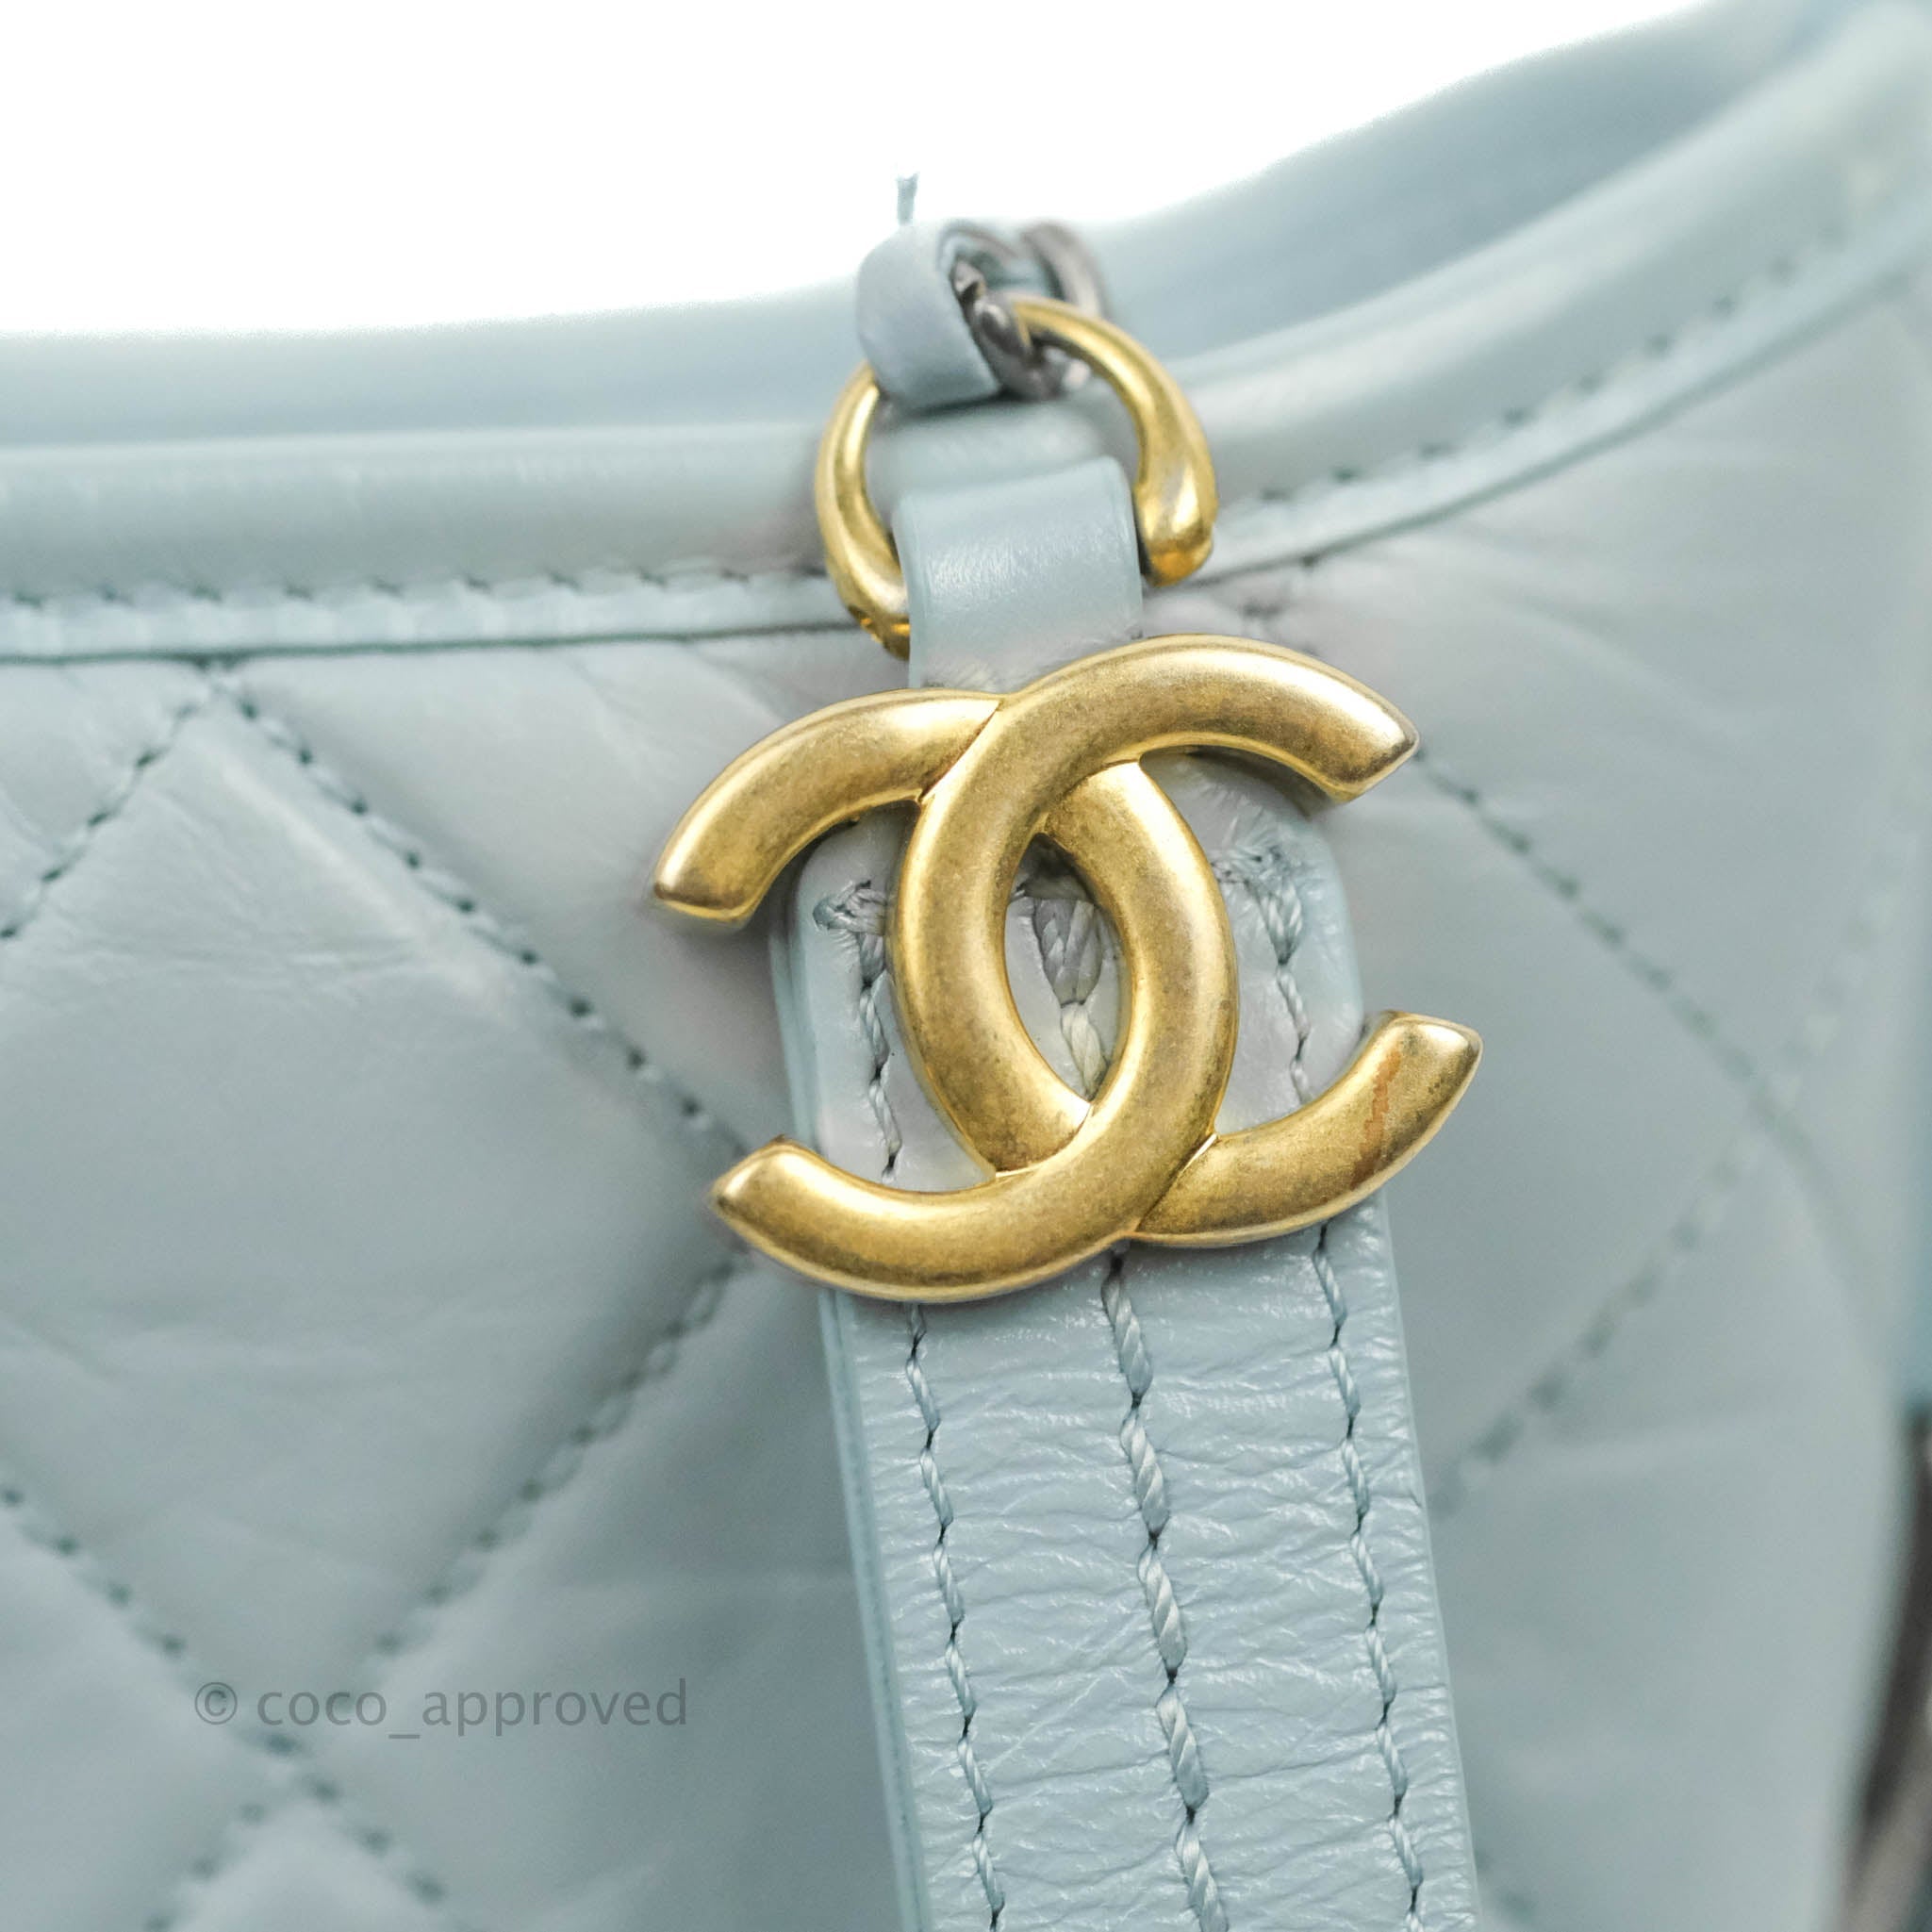 CHANEL Aged Calfskin Quilted Small Gabrielle Hobo Light Blue 392430